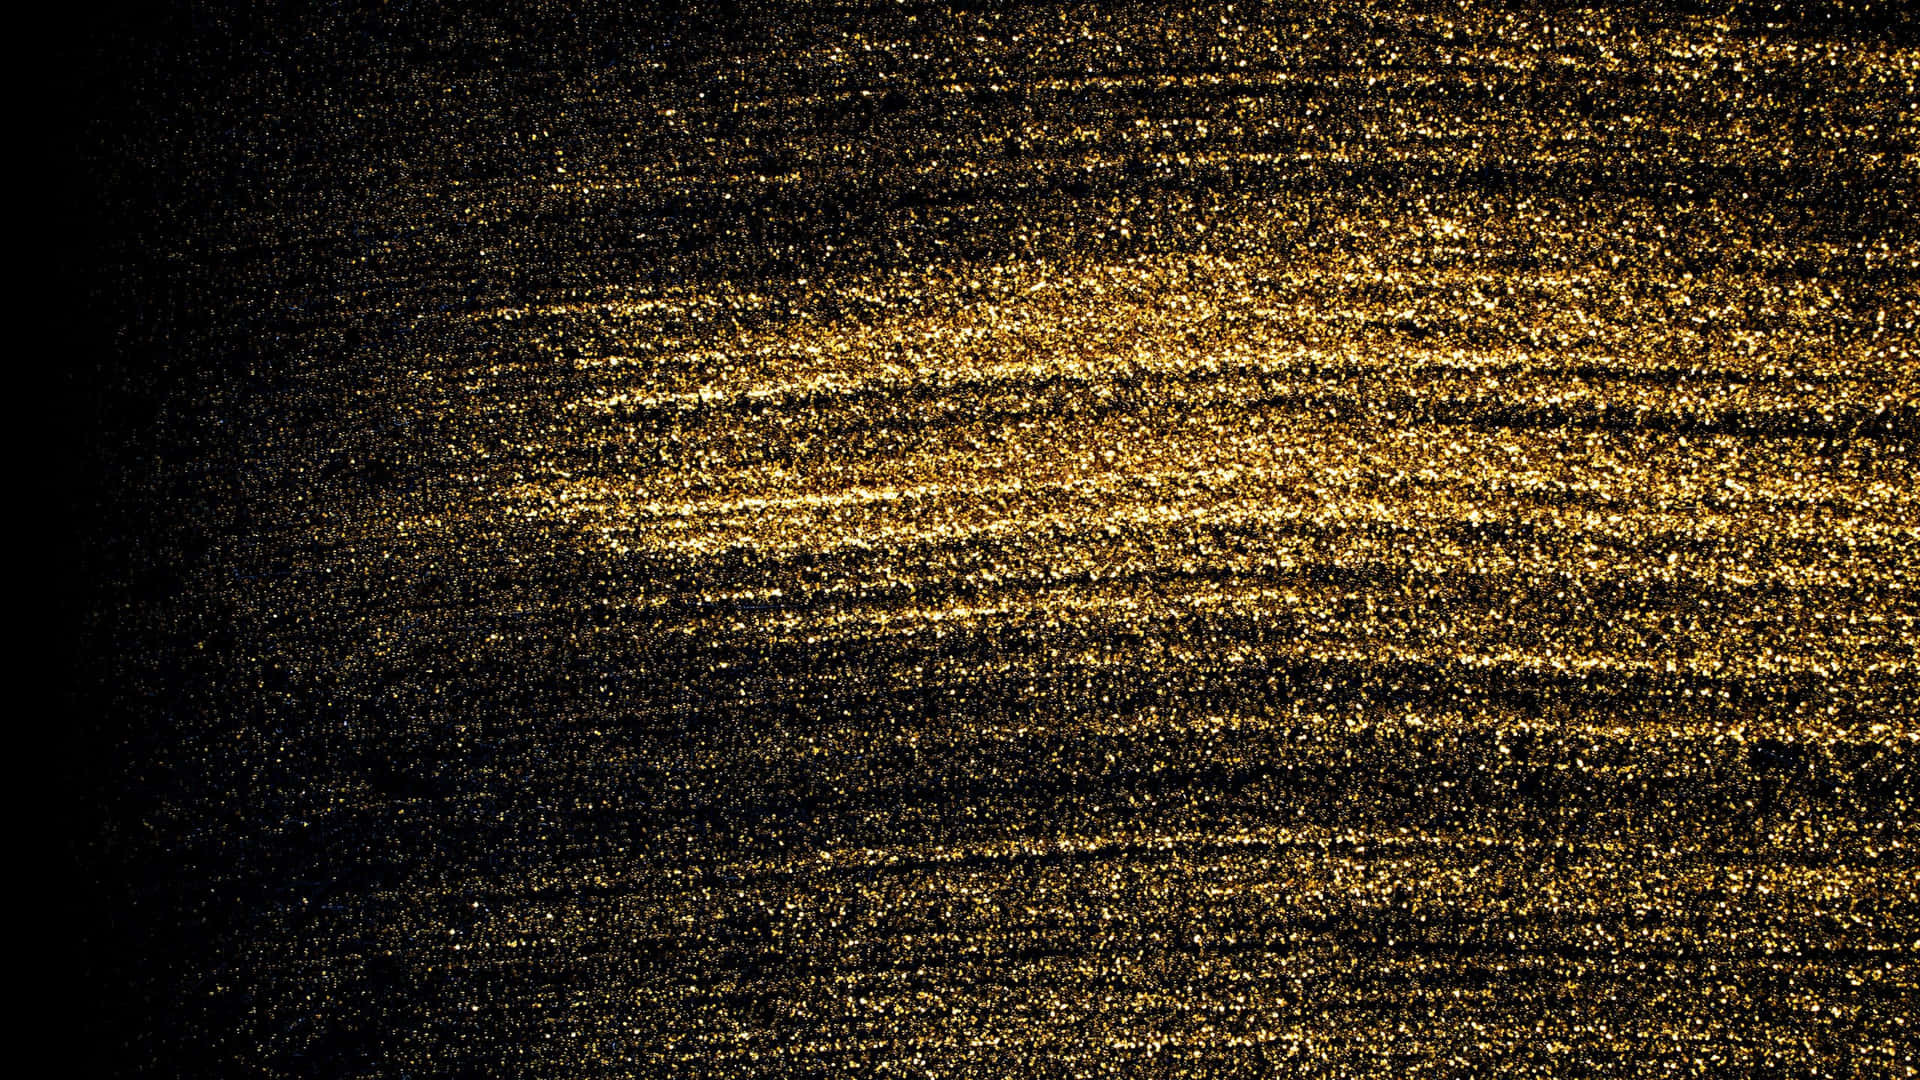 Amazing Black And Gold Glitter Brushed Wallpaper